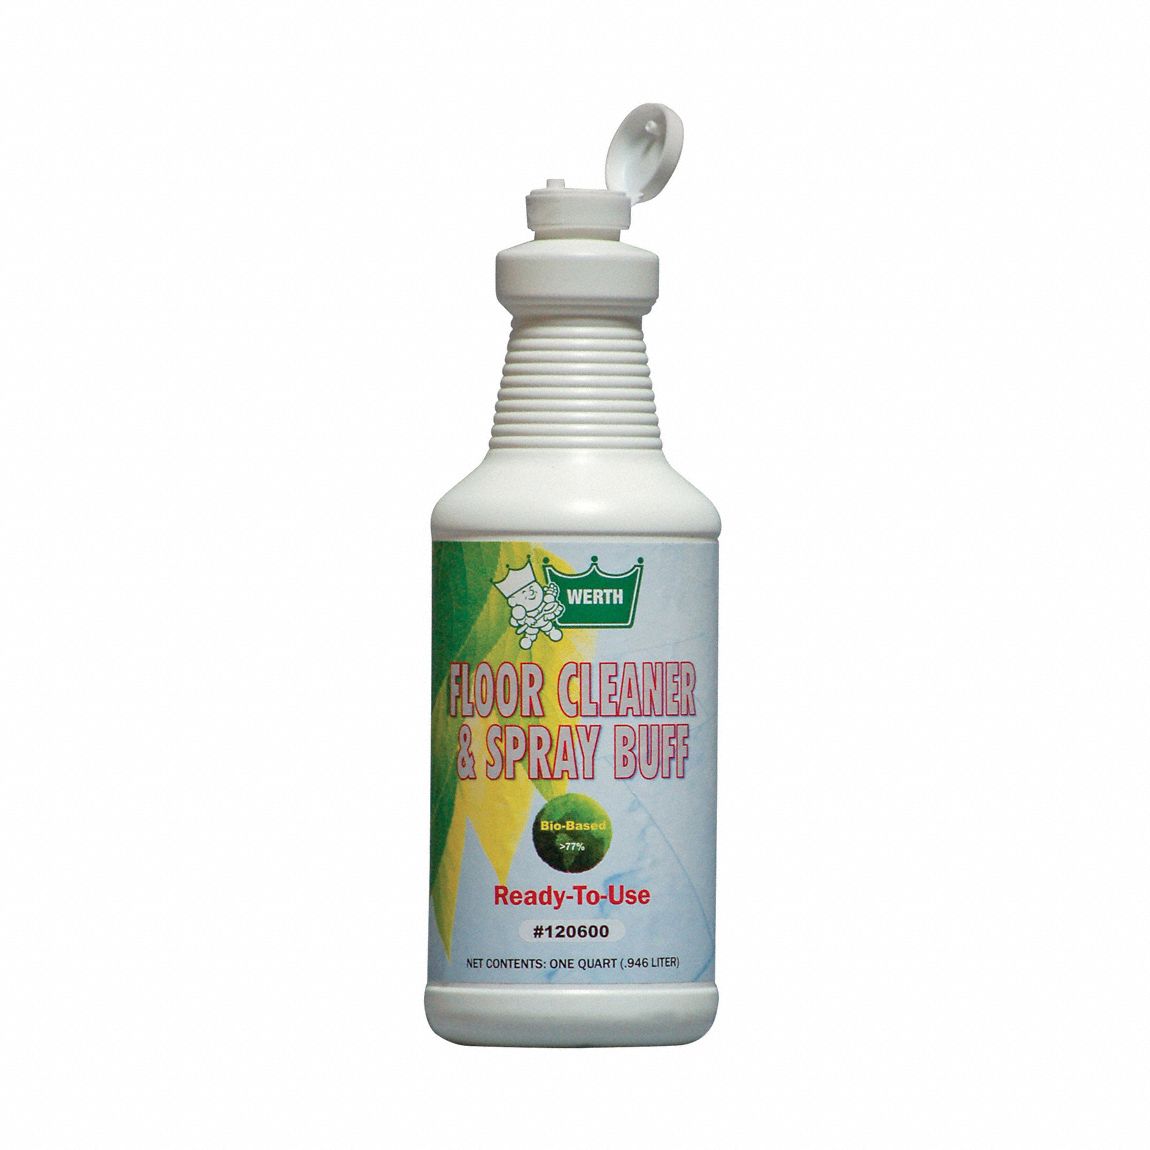 Floor Cleaner and Spray Buff: Bottle, 1 qt Container Size, Ready to Use, 12 PK